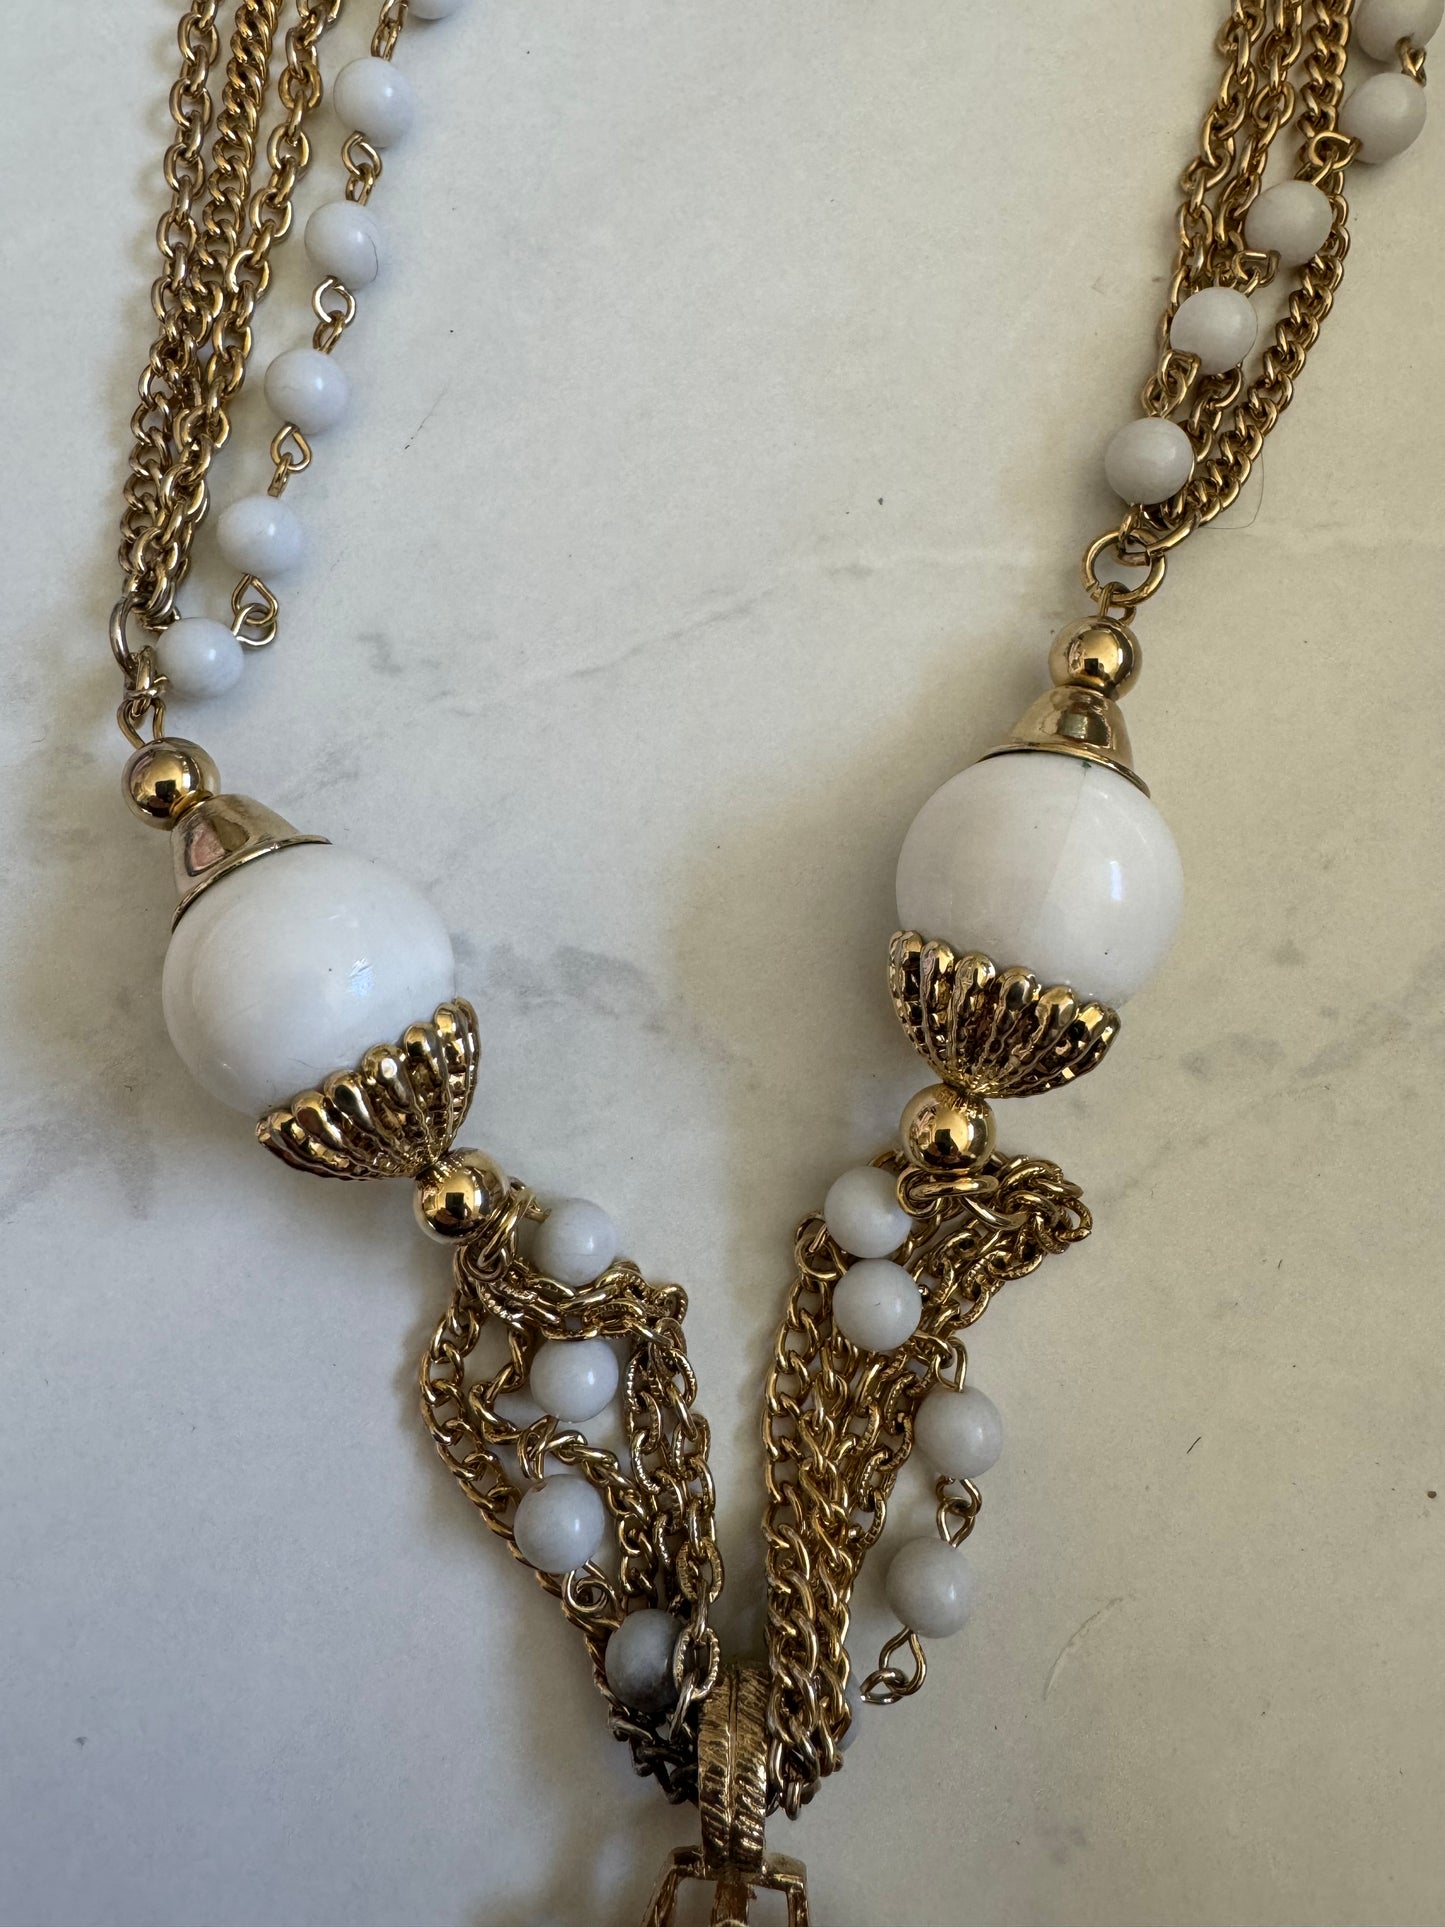 Vintage white and gold tone pendant necklace